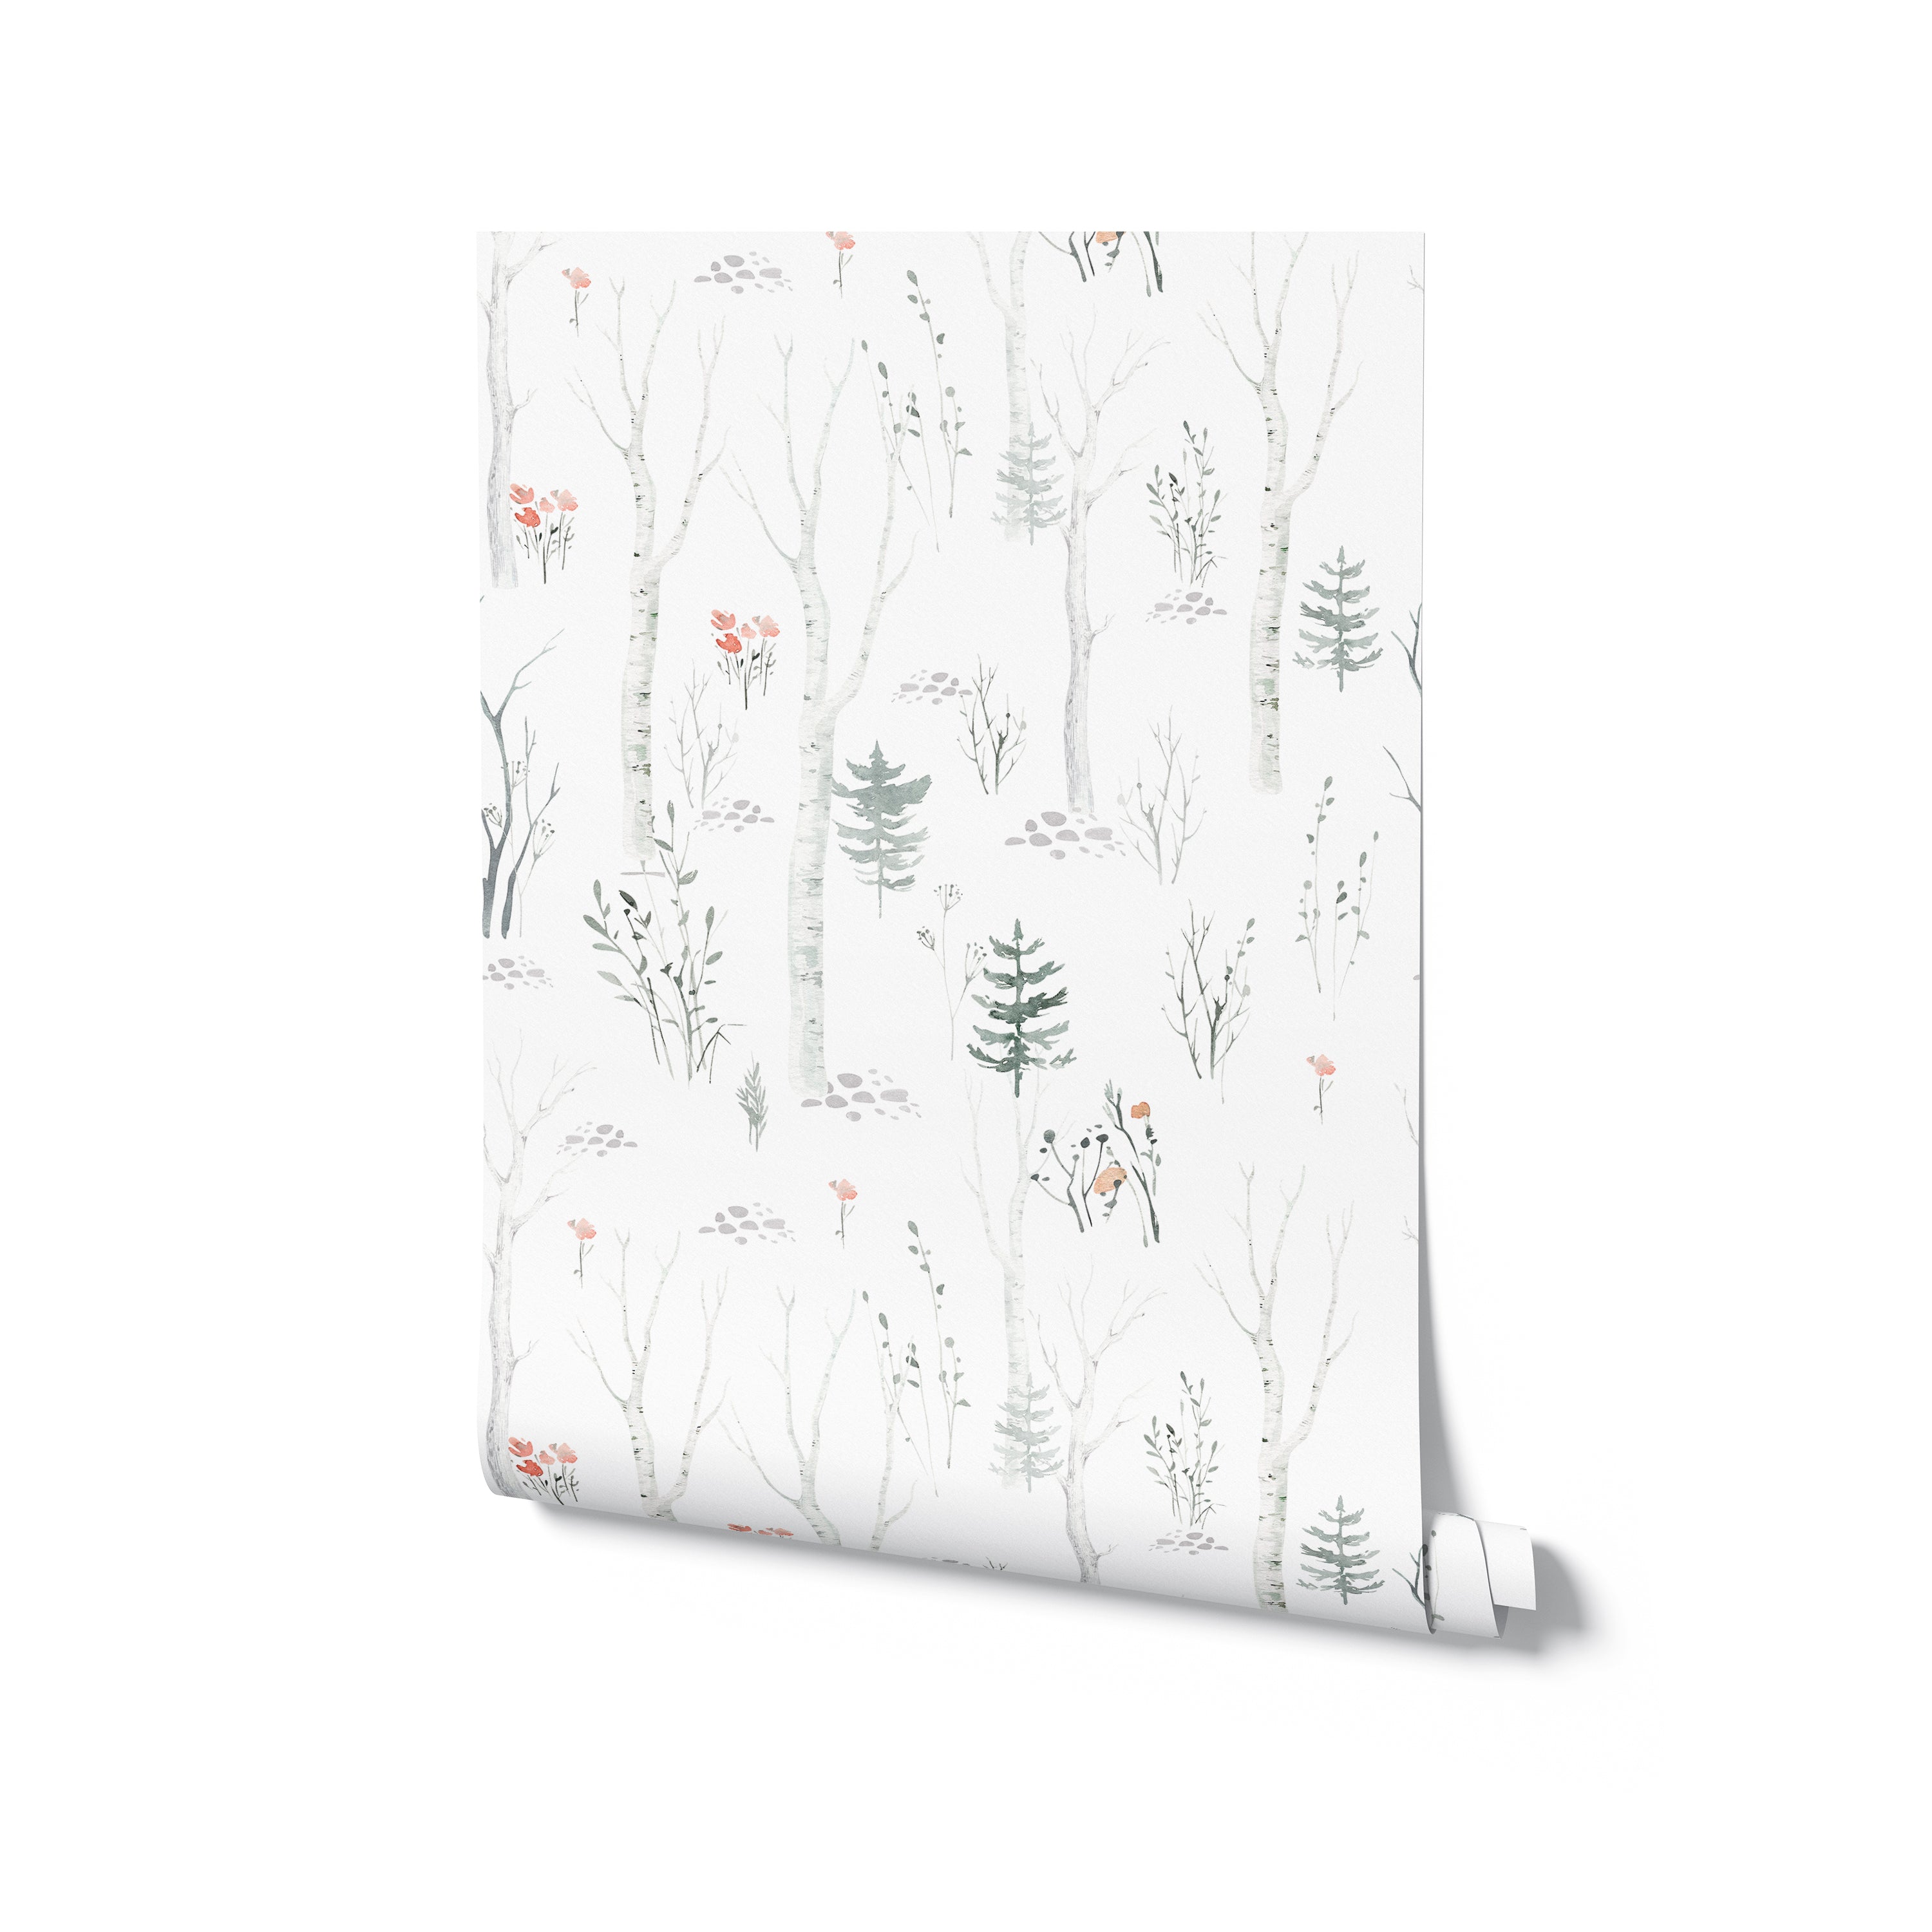 a roll of "Pine and Birch Wallpaper." The roll is partially unrolled to display the wallpaper's full design, highlighting the tranquil forest pattern with elegant birch and pine trees. This image illustrates the wallpaper's potential to transform a space with its peaceful woodland ambiance.